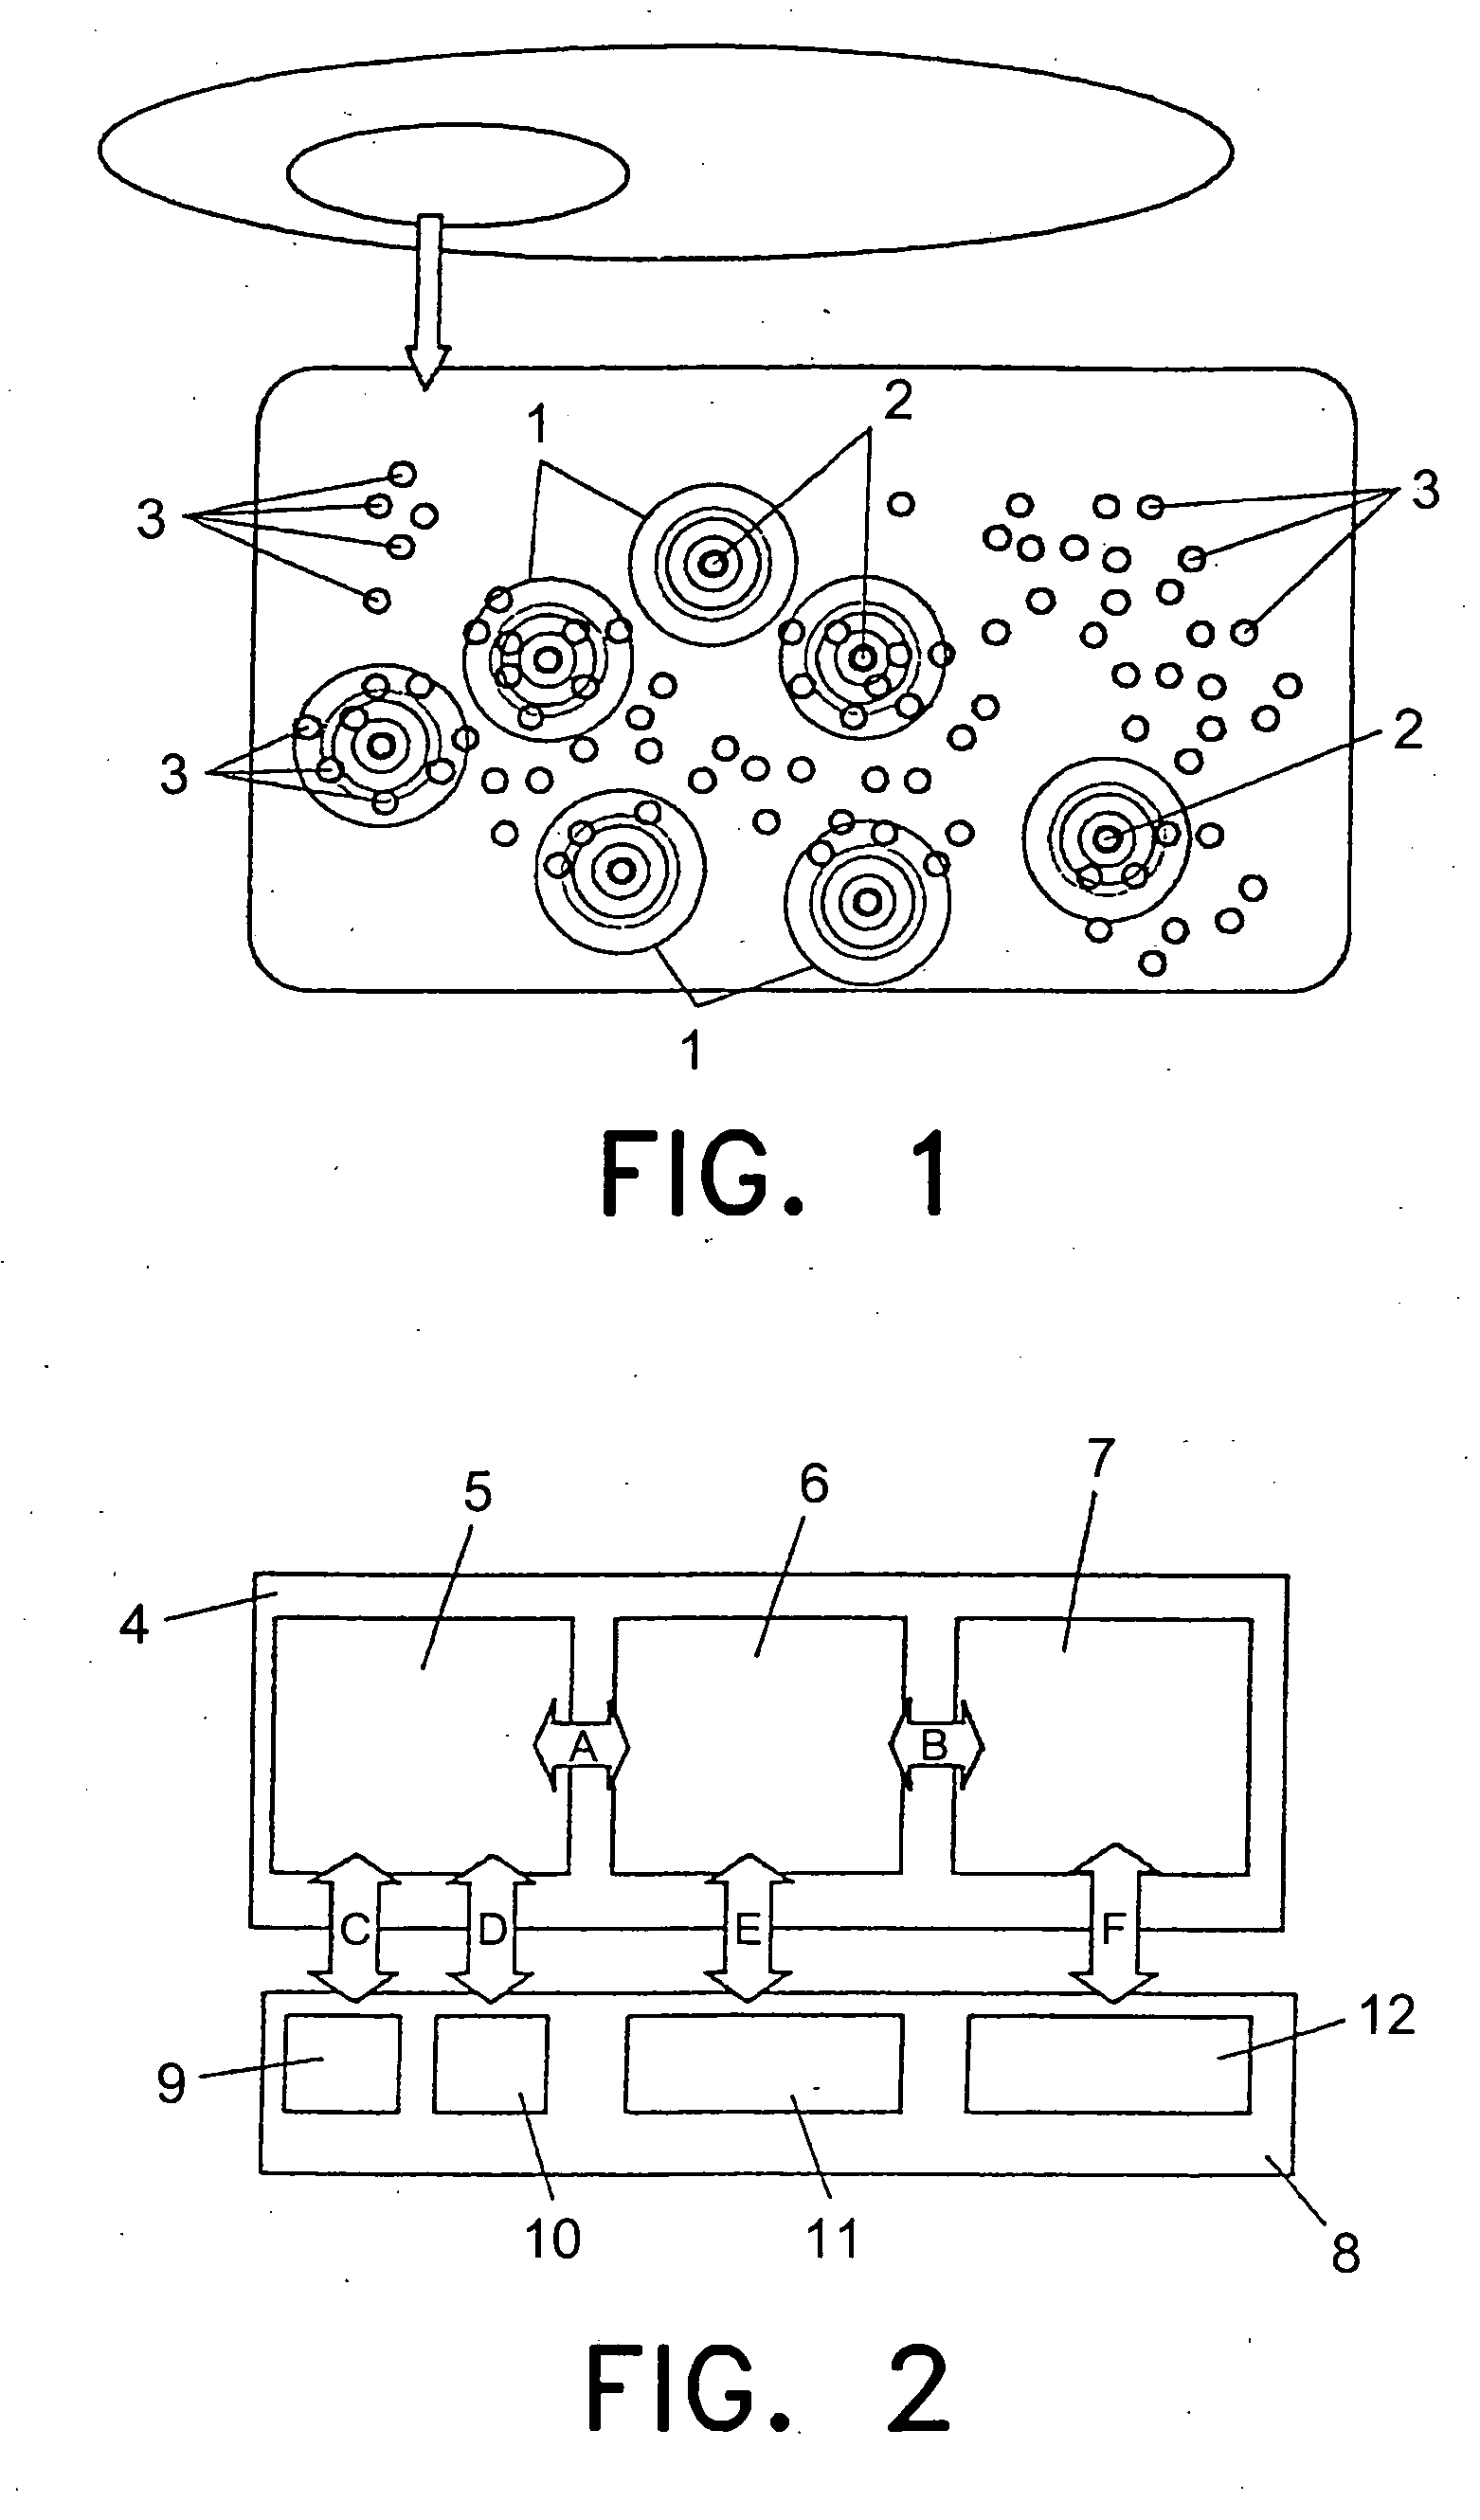 Information broadcasting and support system using mobile devices